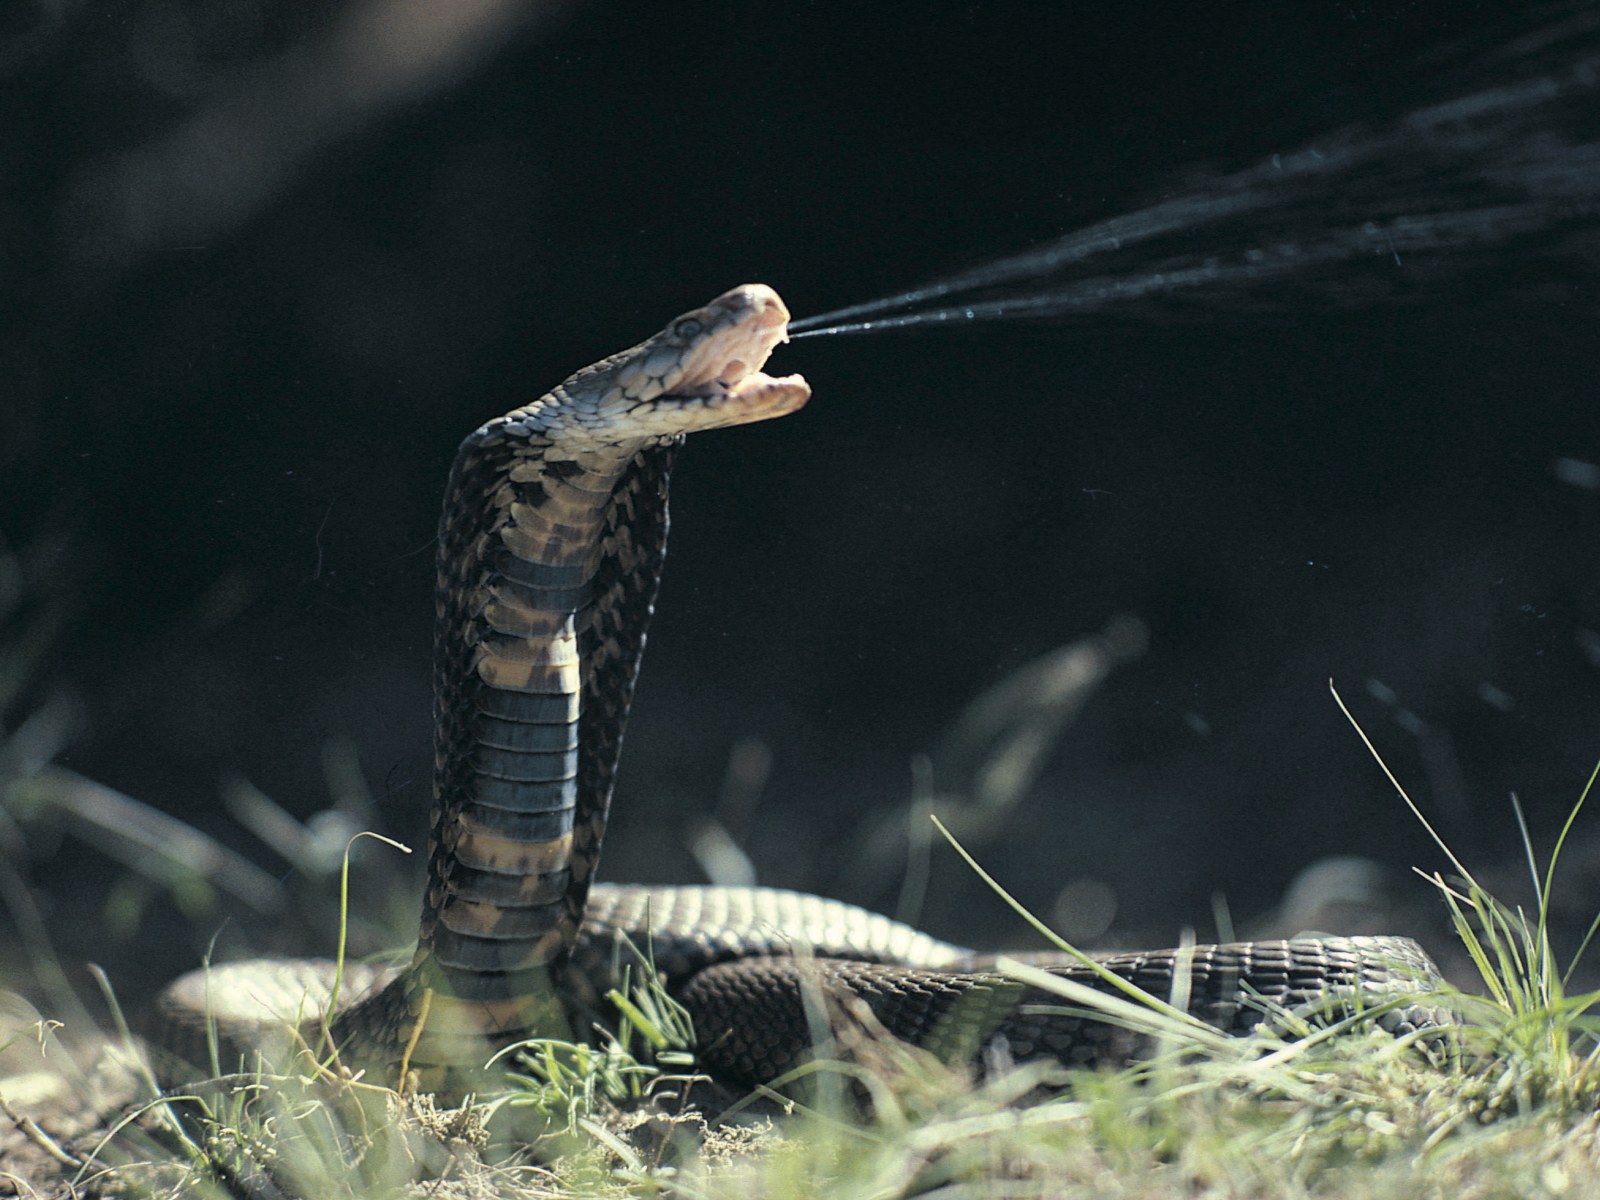 What Happens if a Spitting Cobra Spits on You?